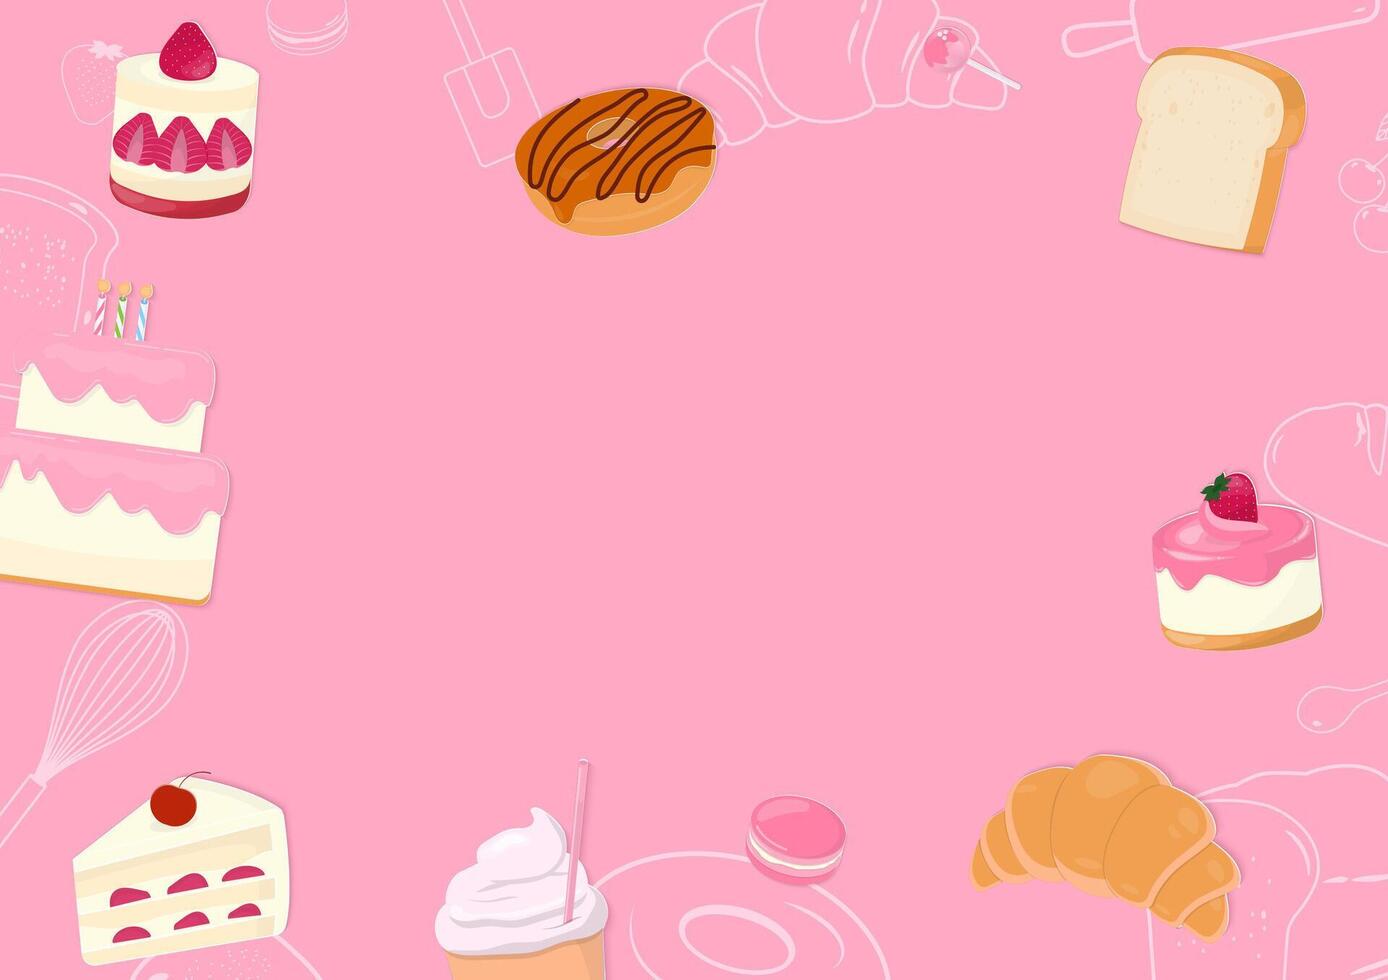 Cake and pastry bakery on pink background vector